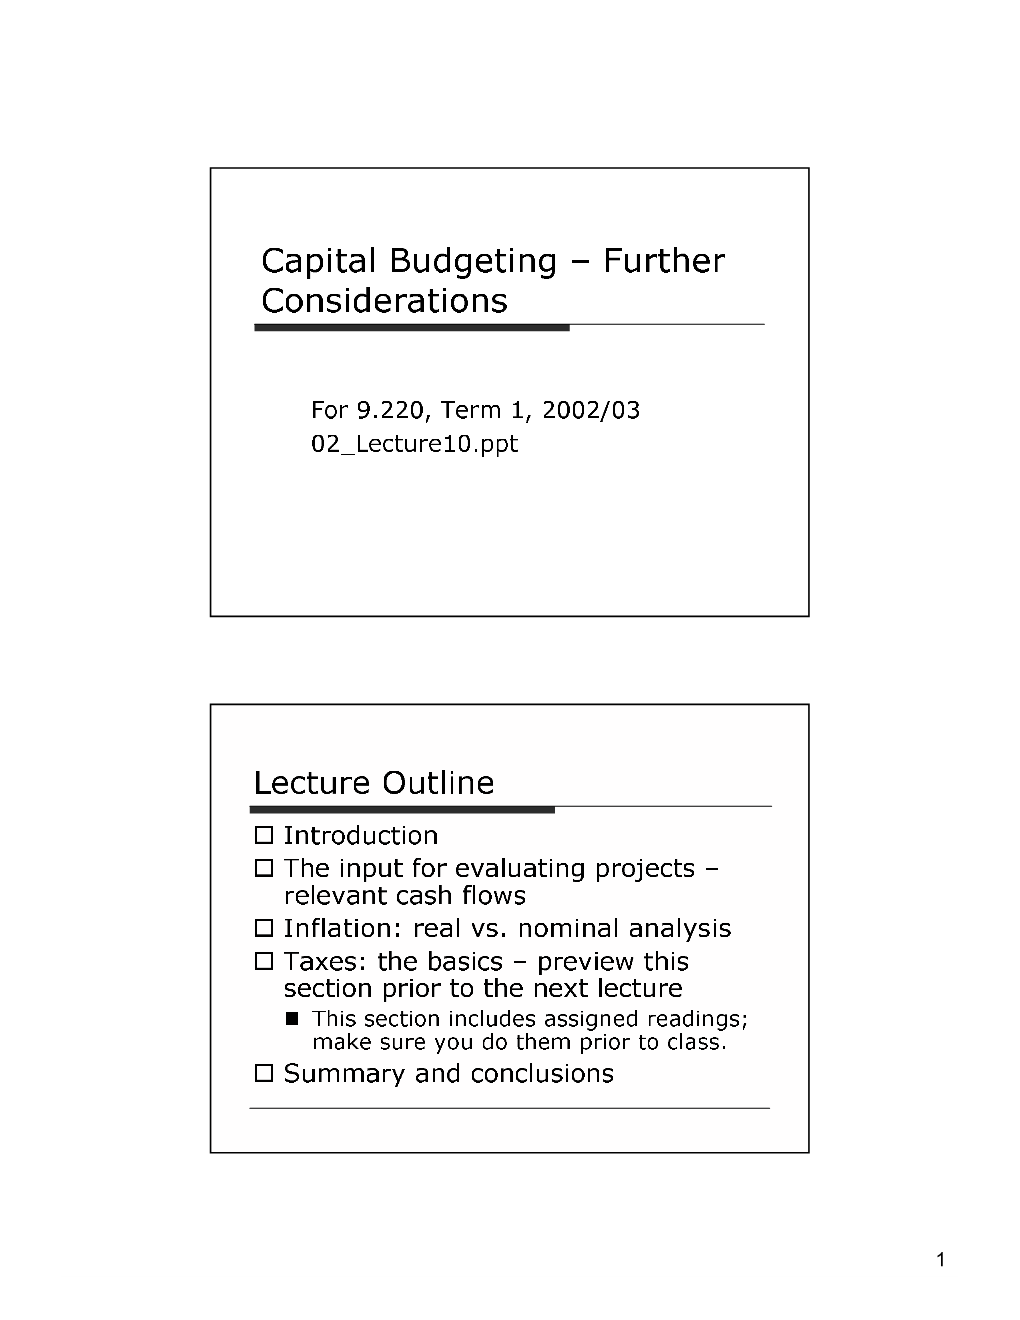 Capital Budgeting – Further Considerations